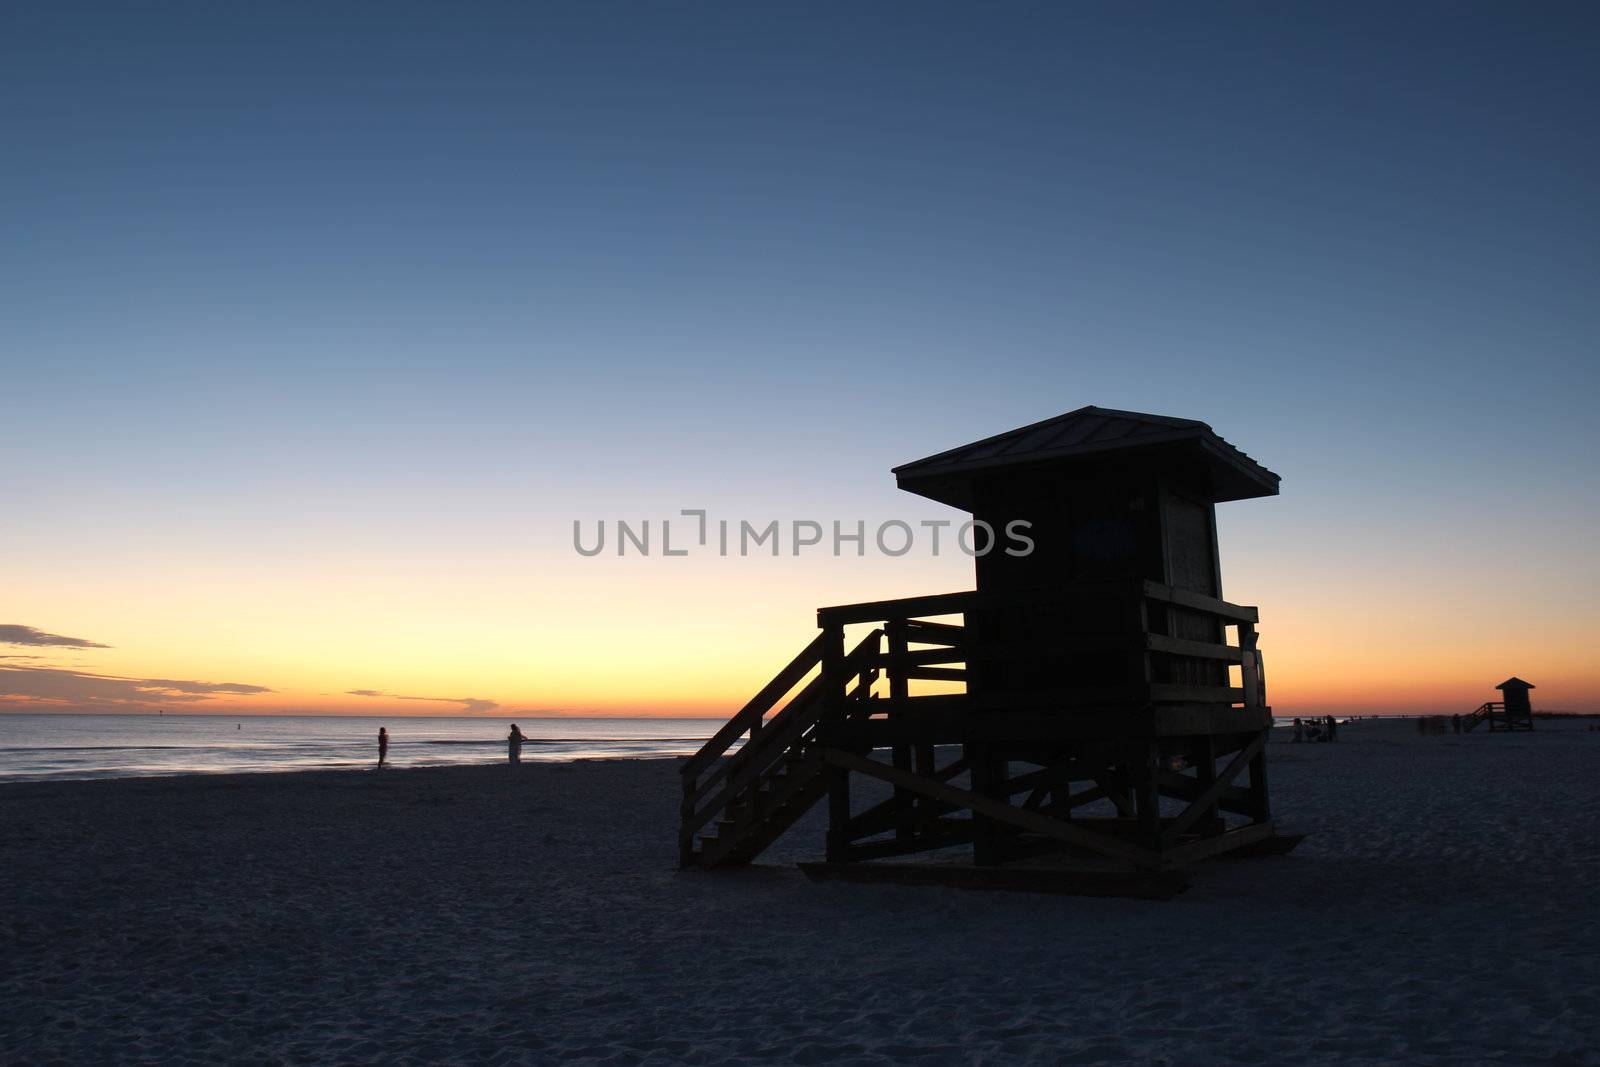 Lifeguard station on Siesta Key Beach, Florida, is silhouetted against the setting sun with a dark blue and orange sky